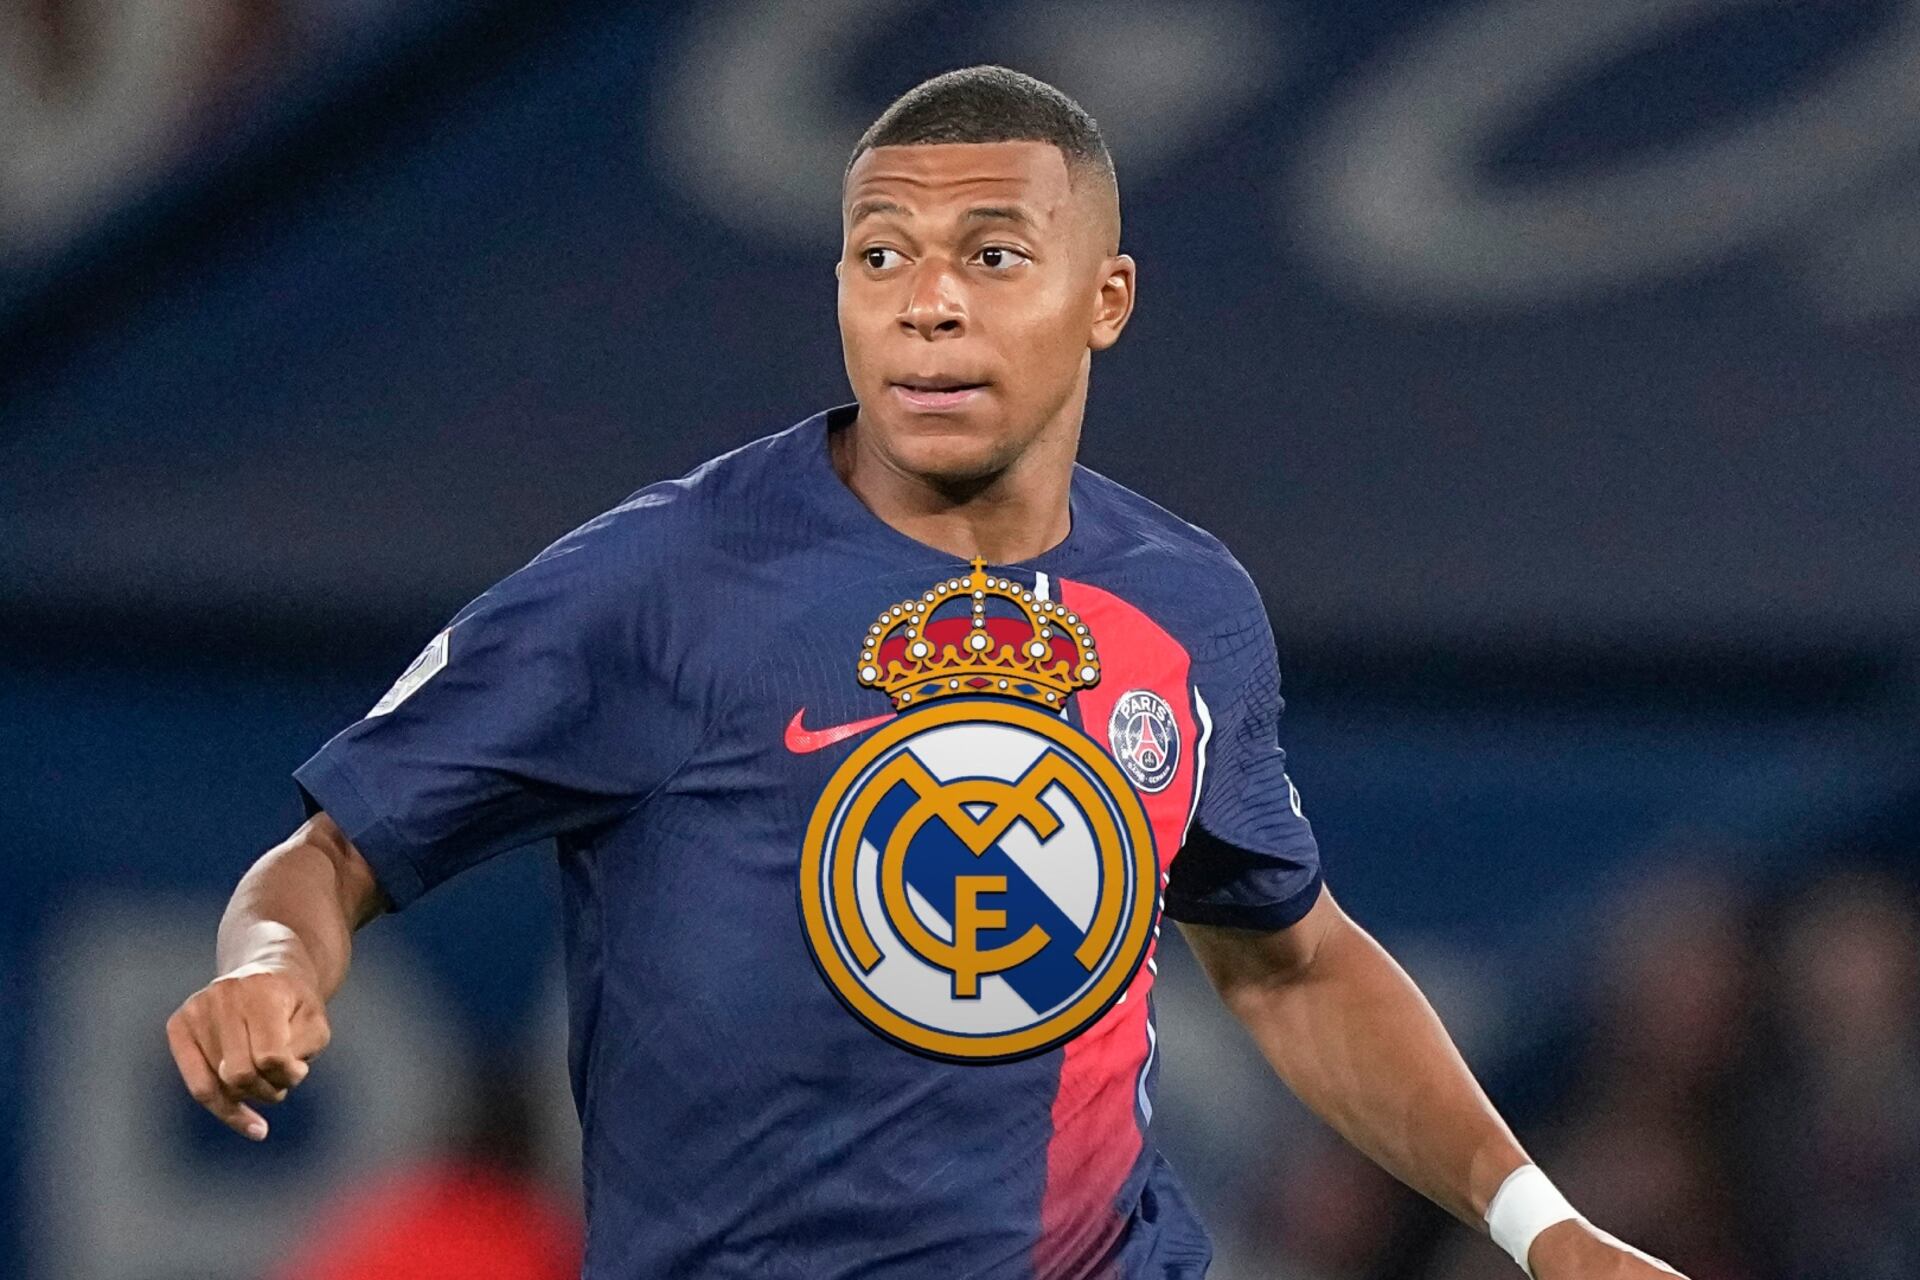 (VIDEO) A leaked video would confirm Mbappé's signing for Real Madrid, the shocking comments on the move